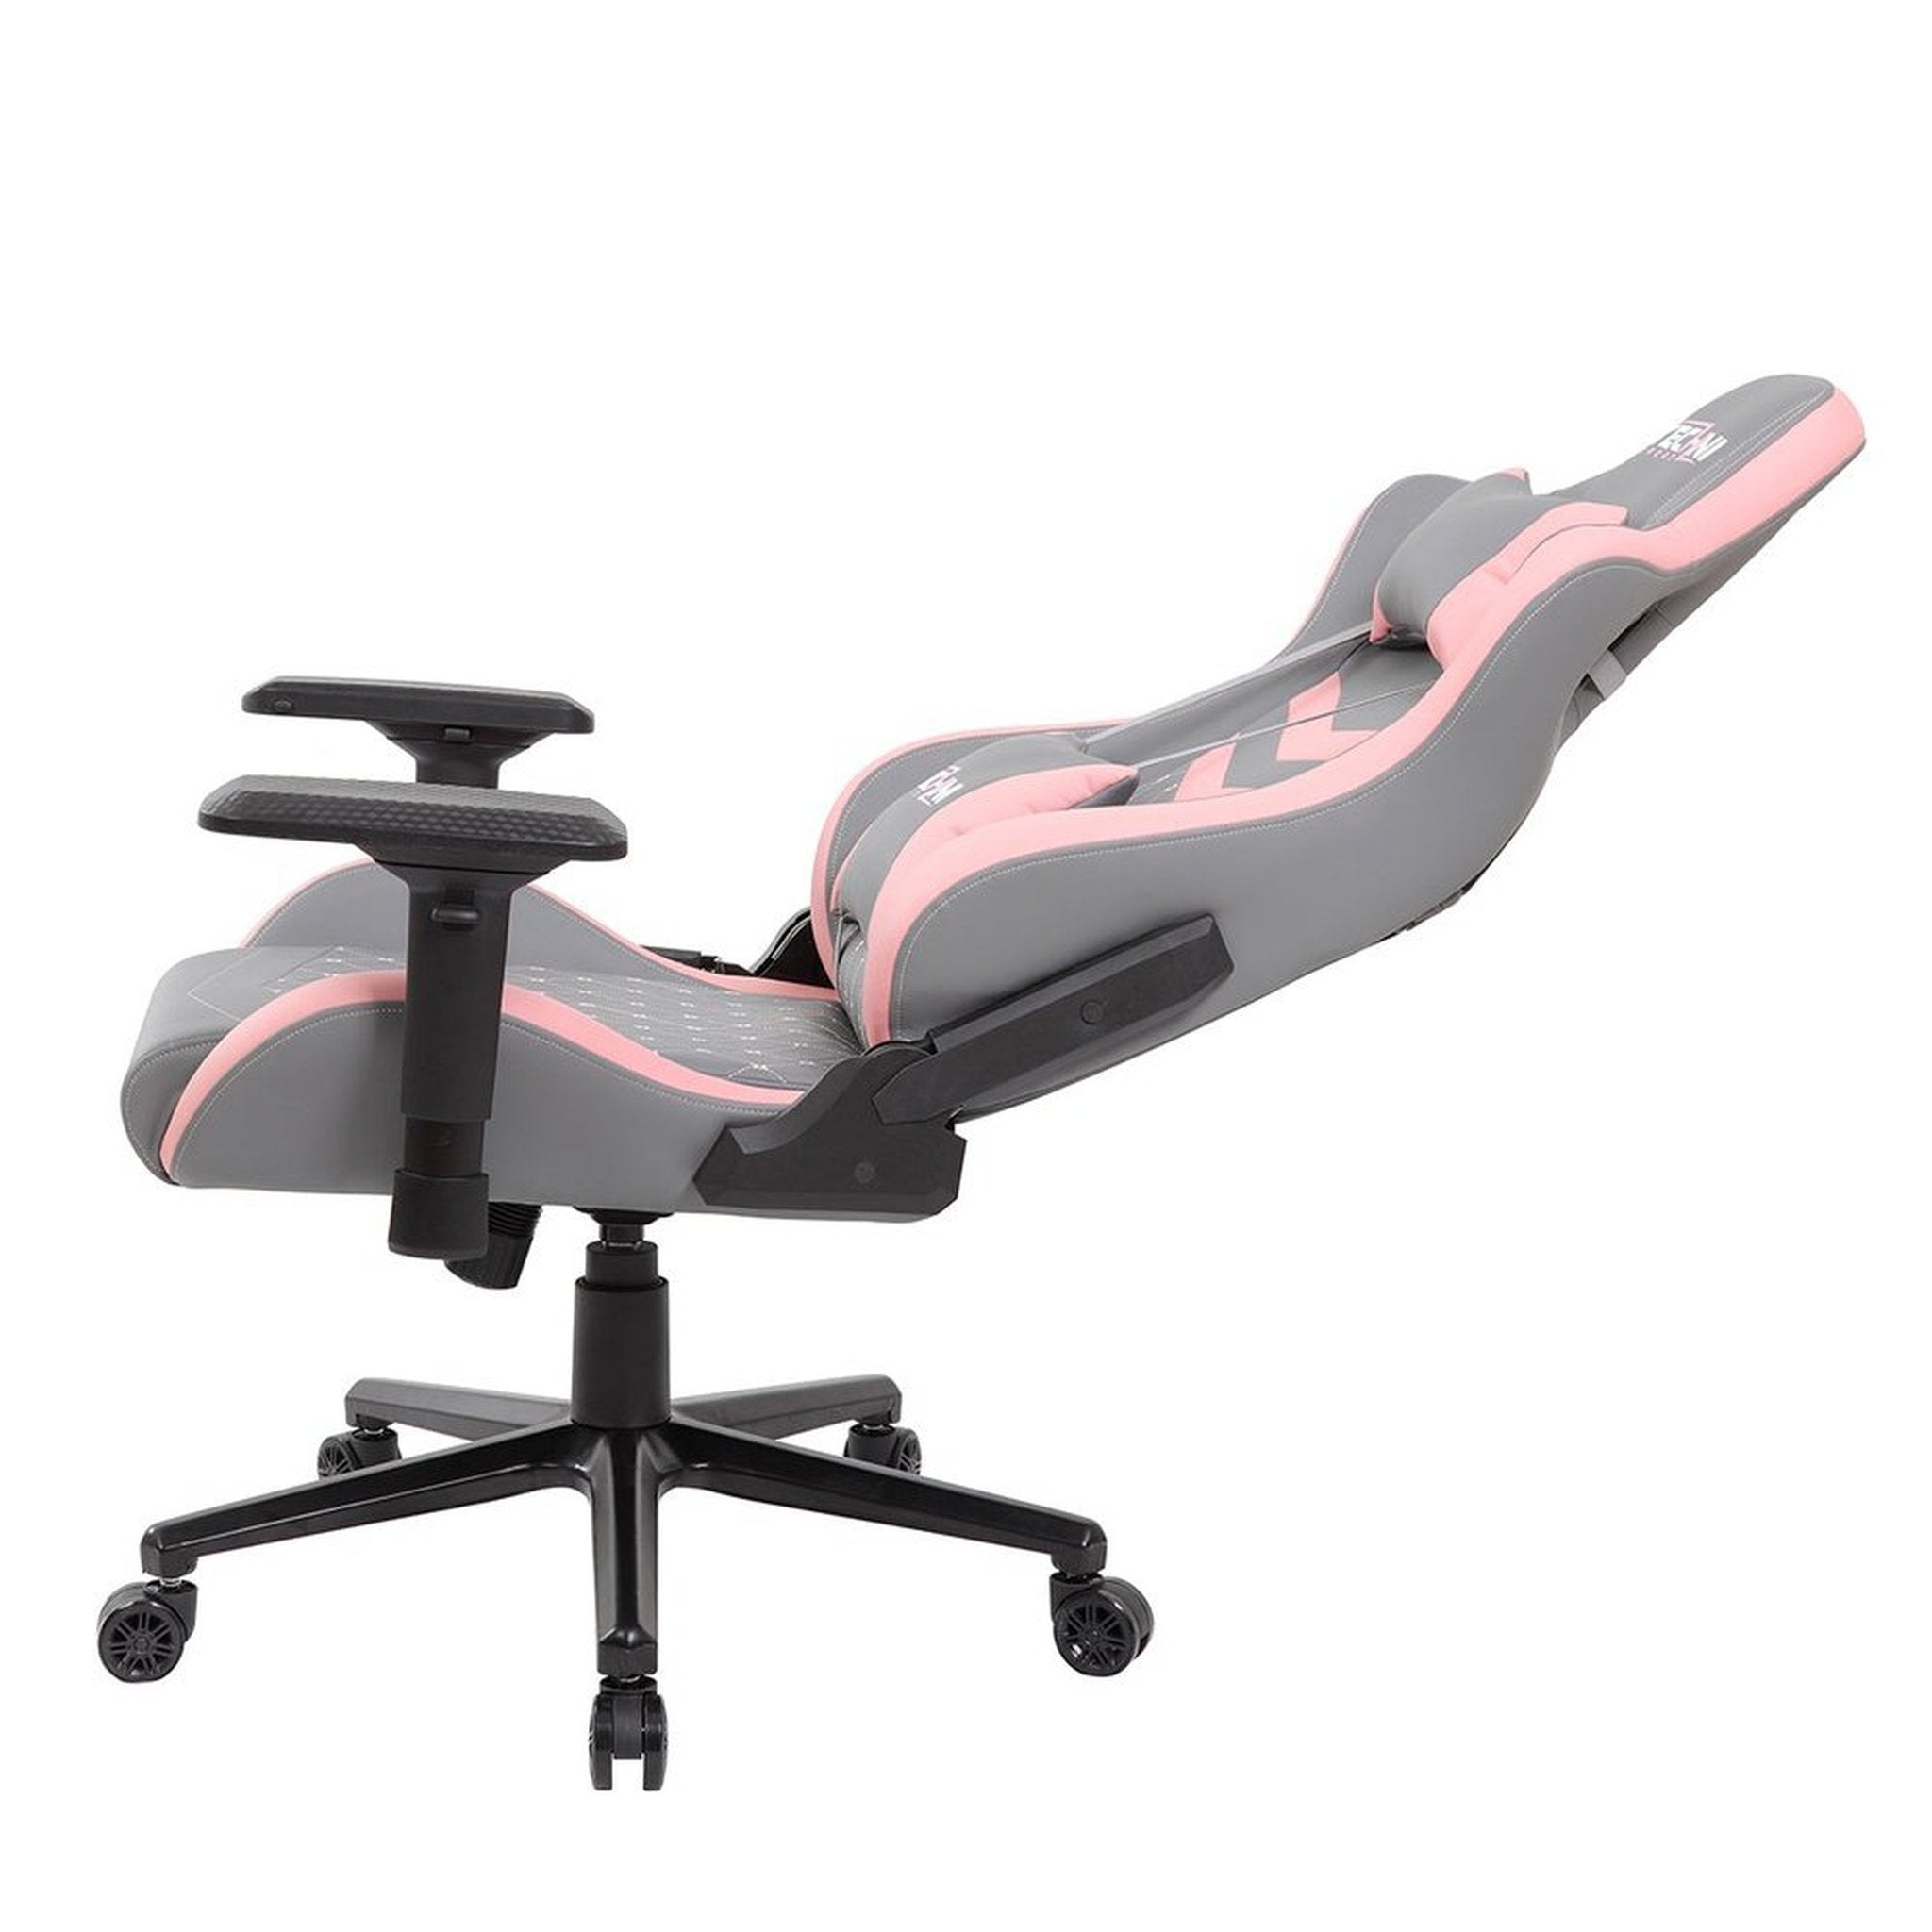 Techni Sport TS83 GameMaster Series Pink/Grey Gaming Chair High Back Racer Style